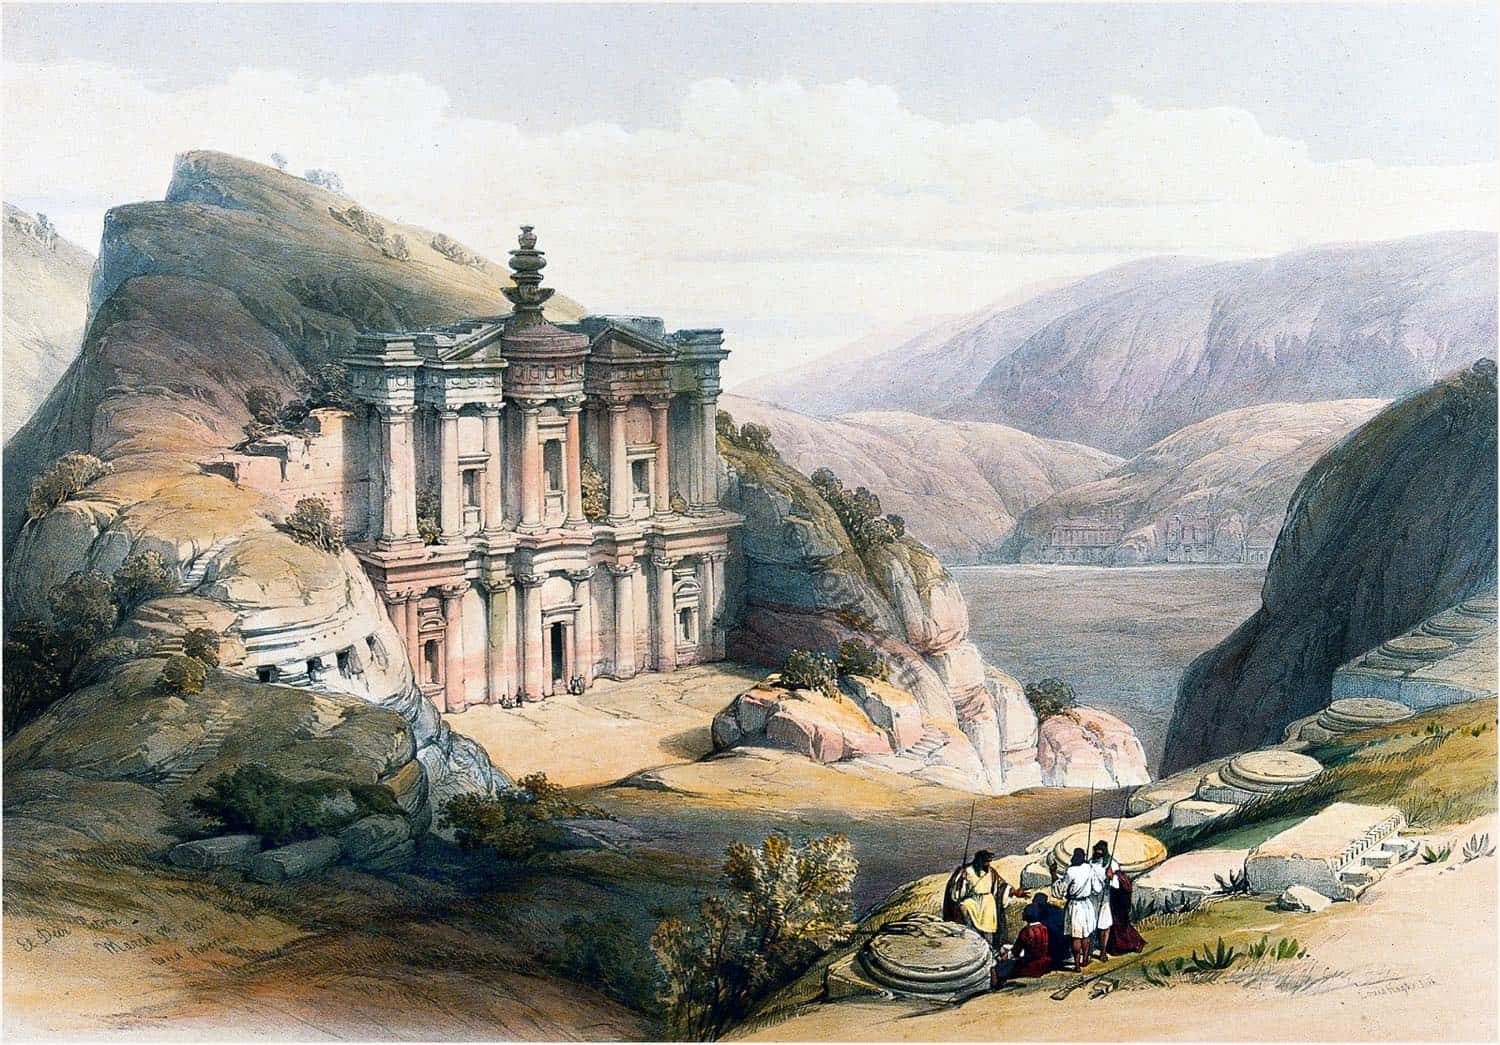 The Rock temple of El Deir at Petra. The Holy Land by David Roberts.